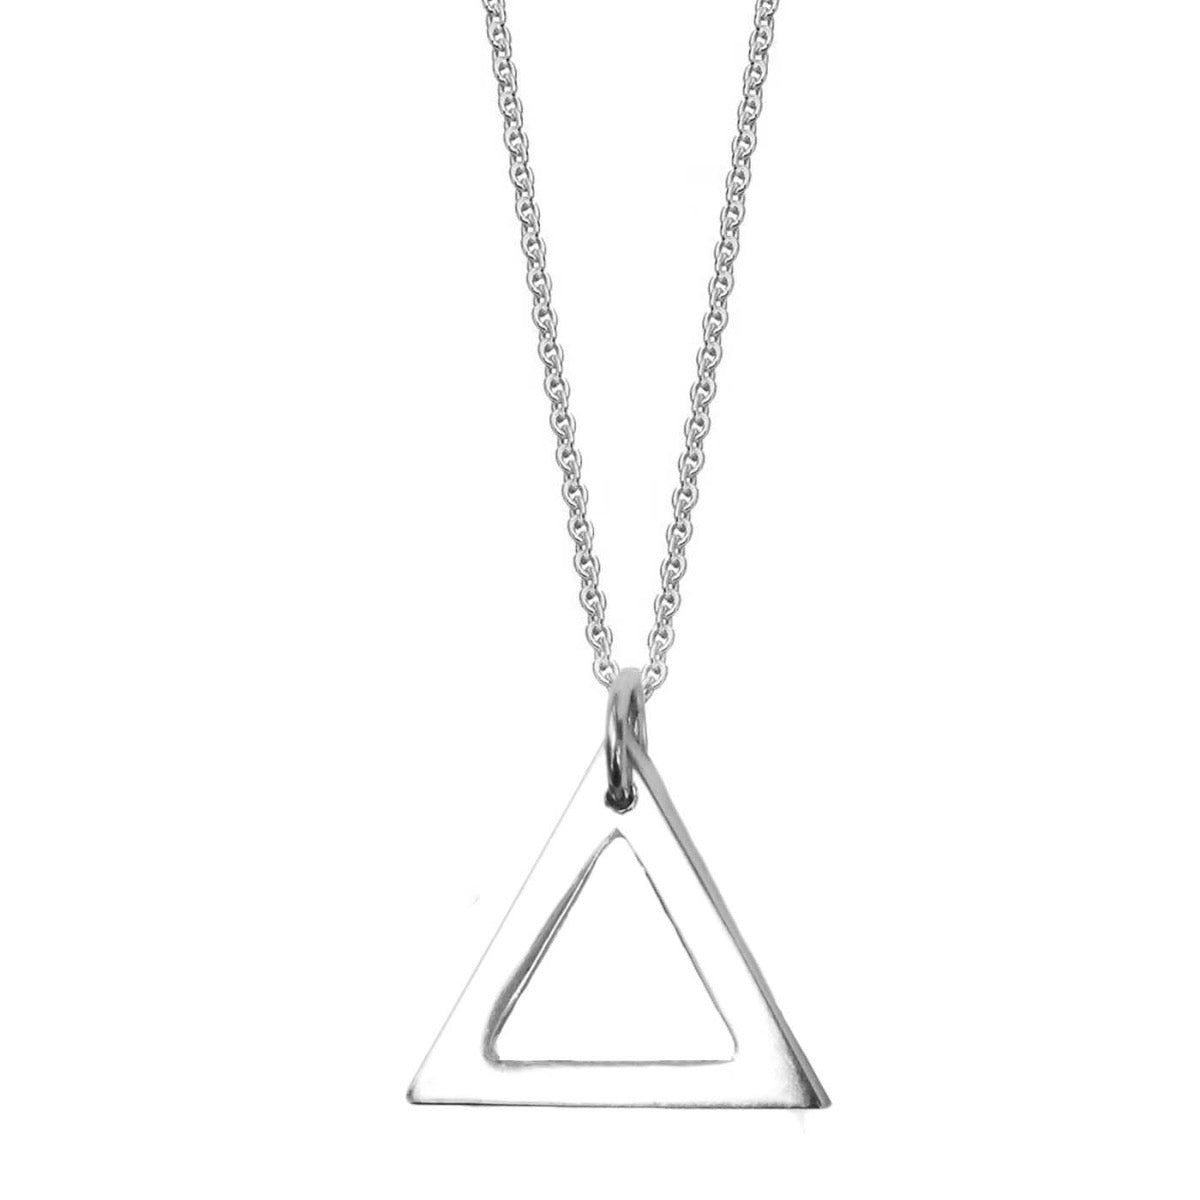 Large Sterling Silver Triangulum Necklace | Hersey & Son Silversmiths